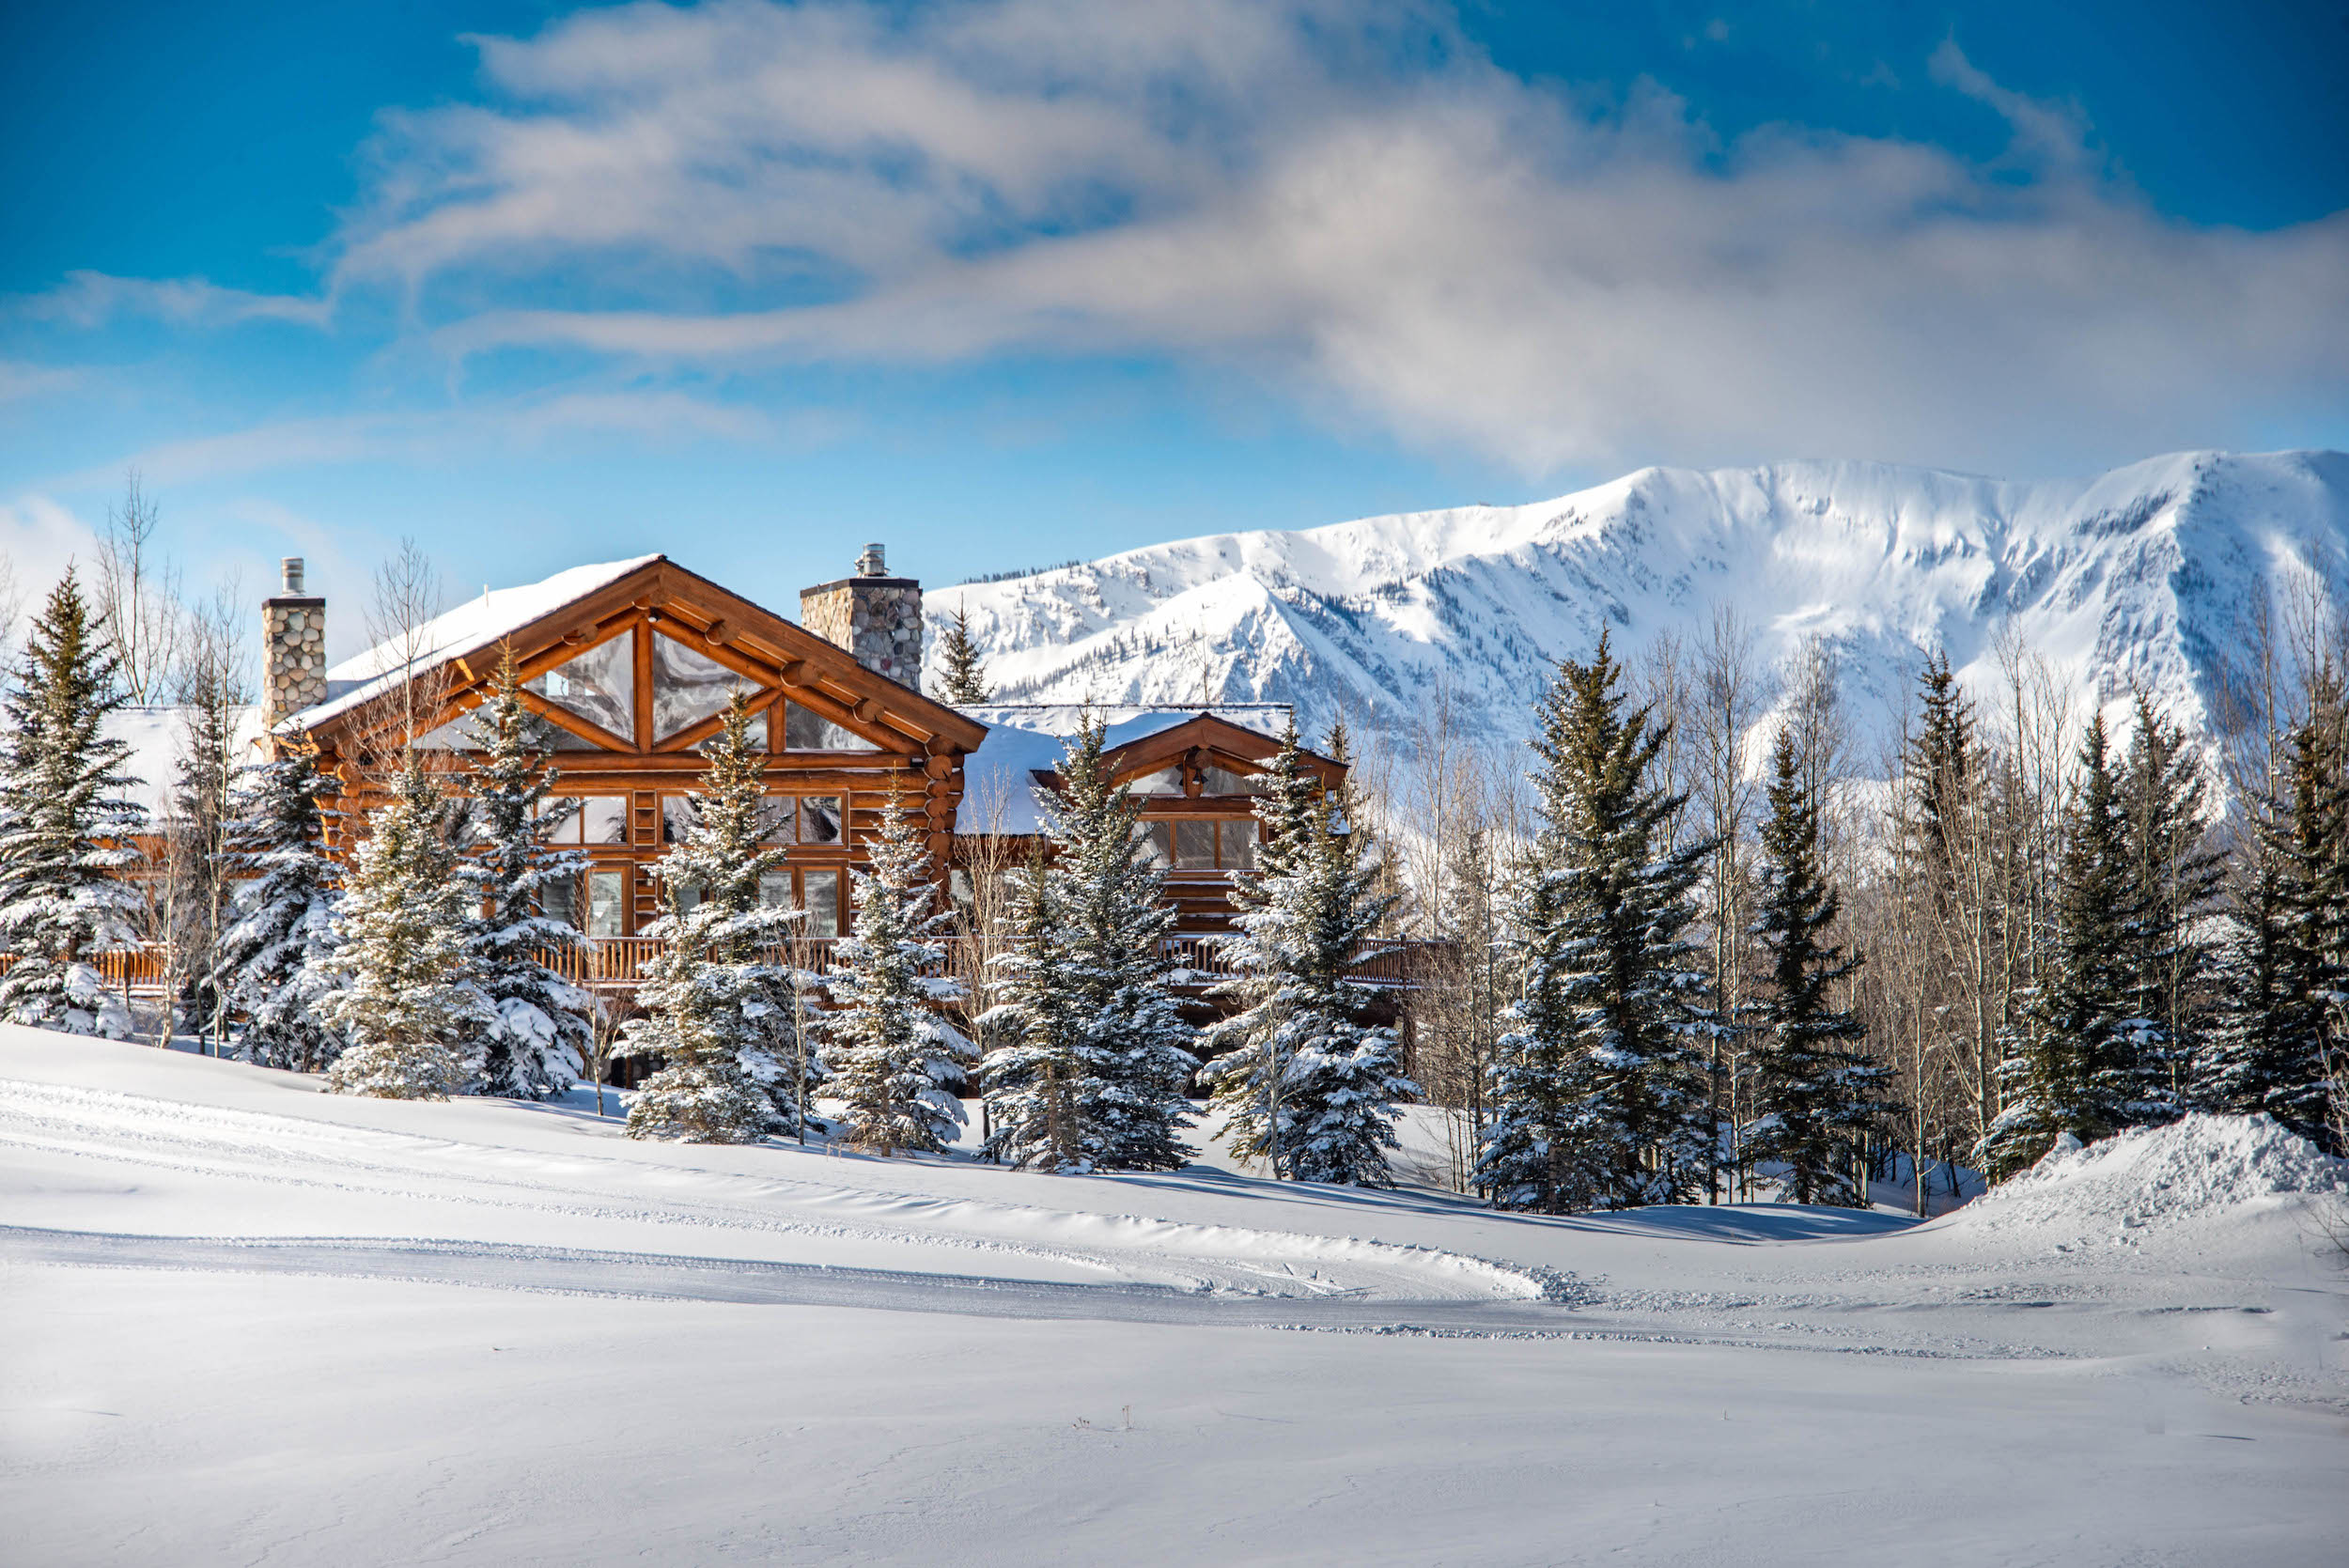 A large home on a snowy hillside with mountains in the background. This is an example of a Mt. Crested Butte lodging property